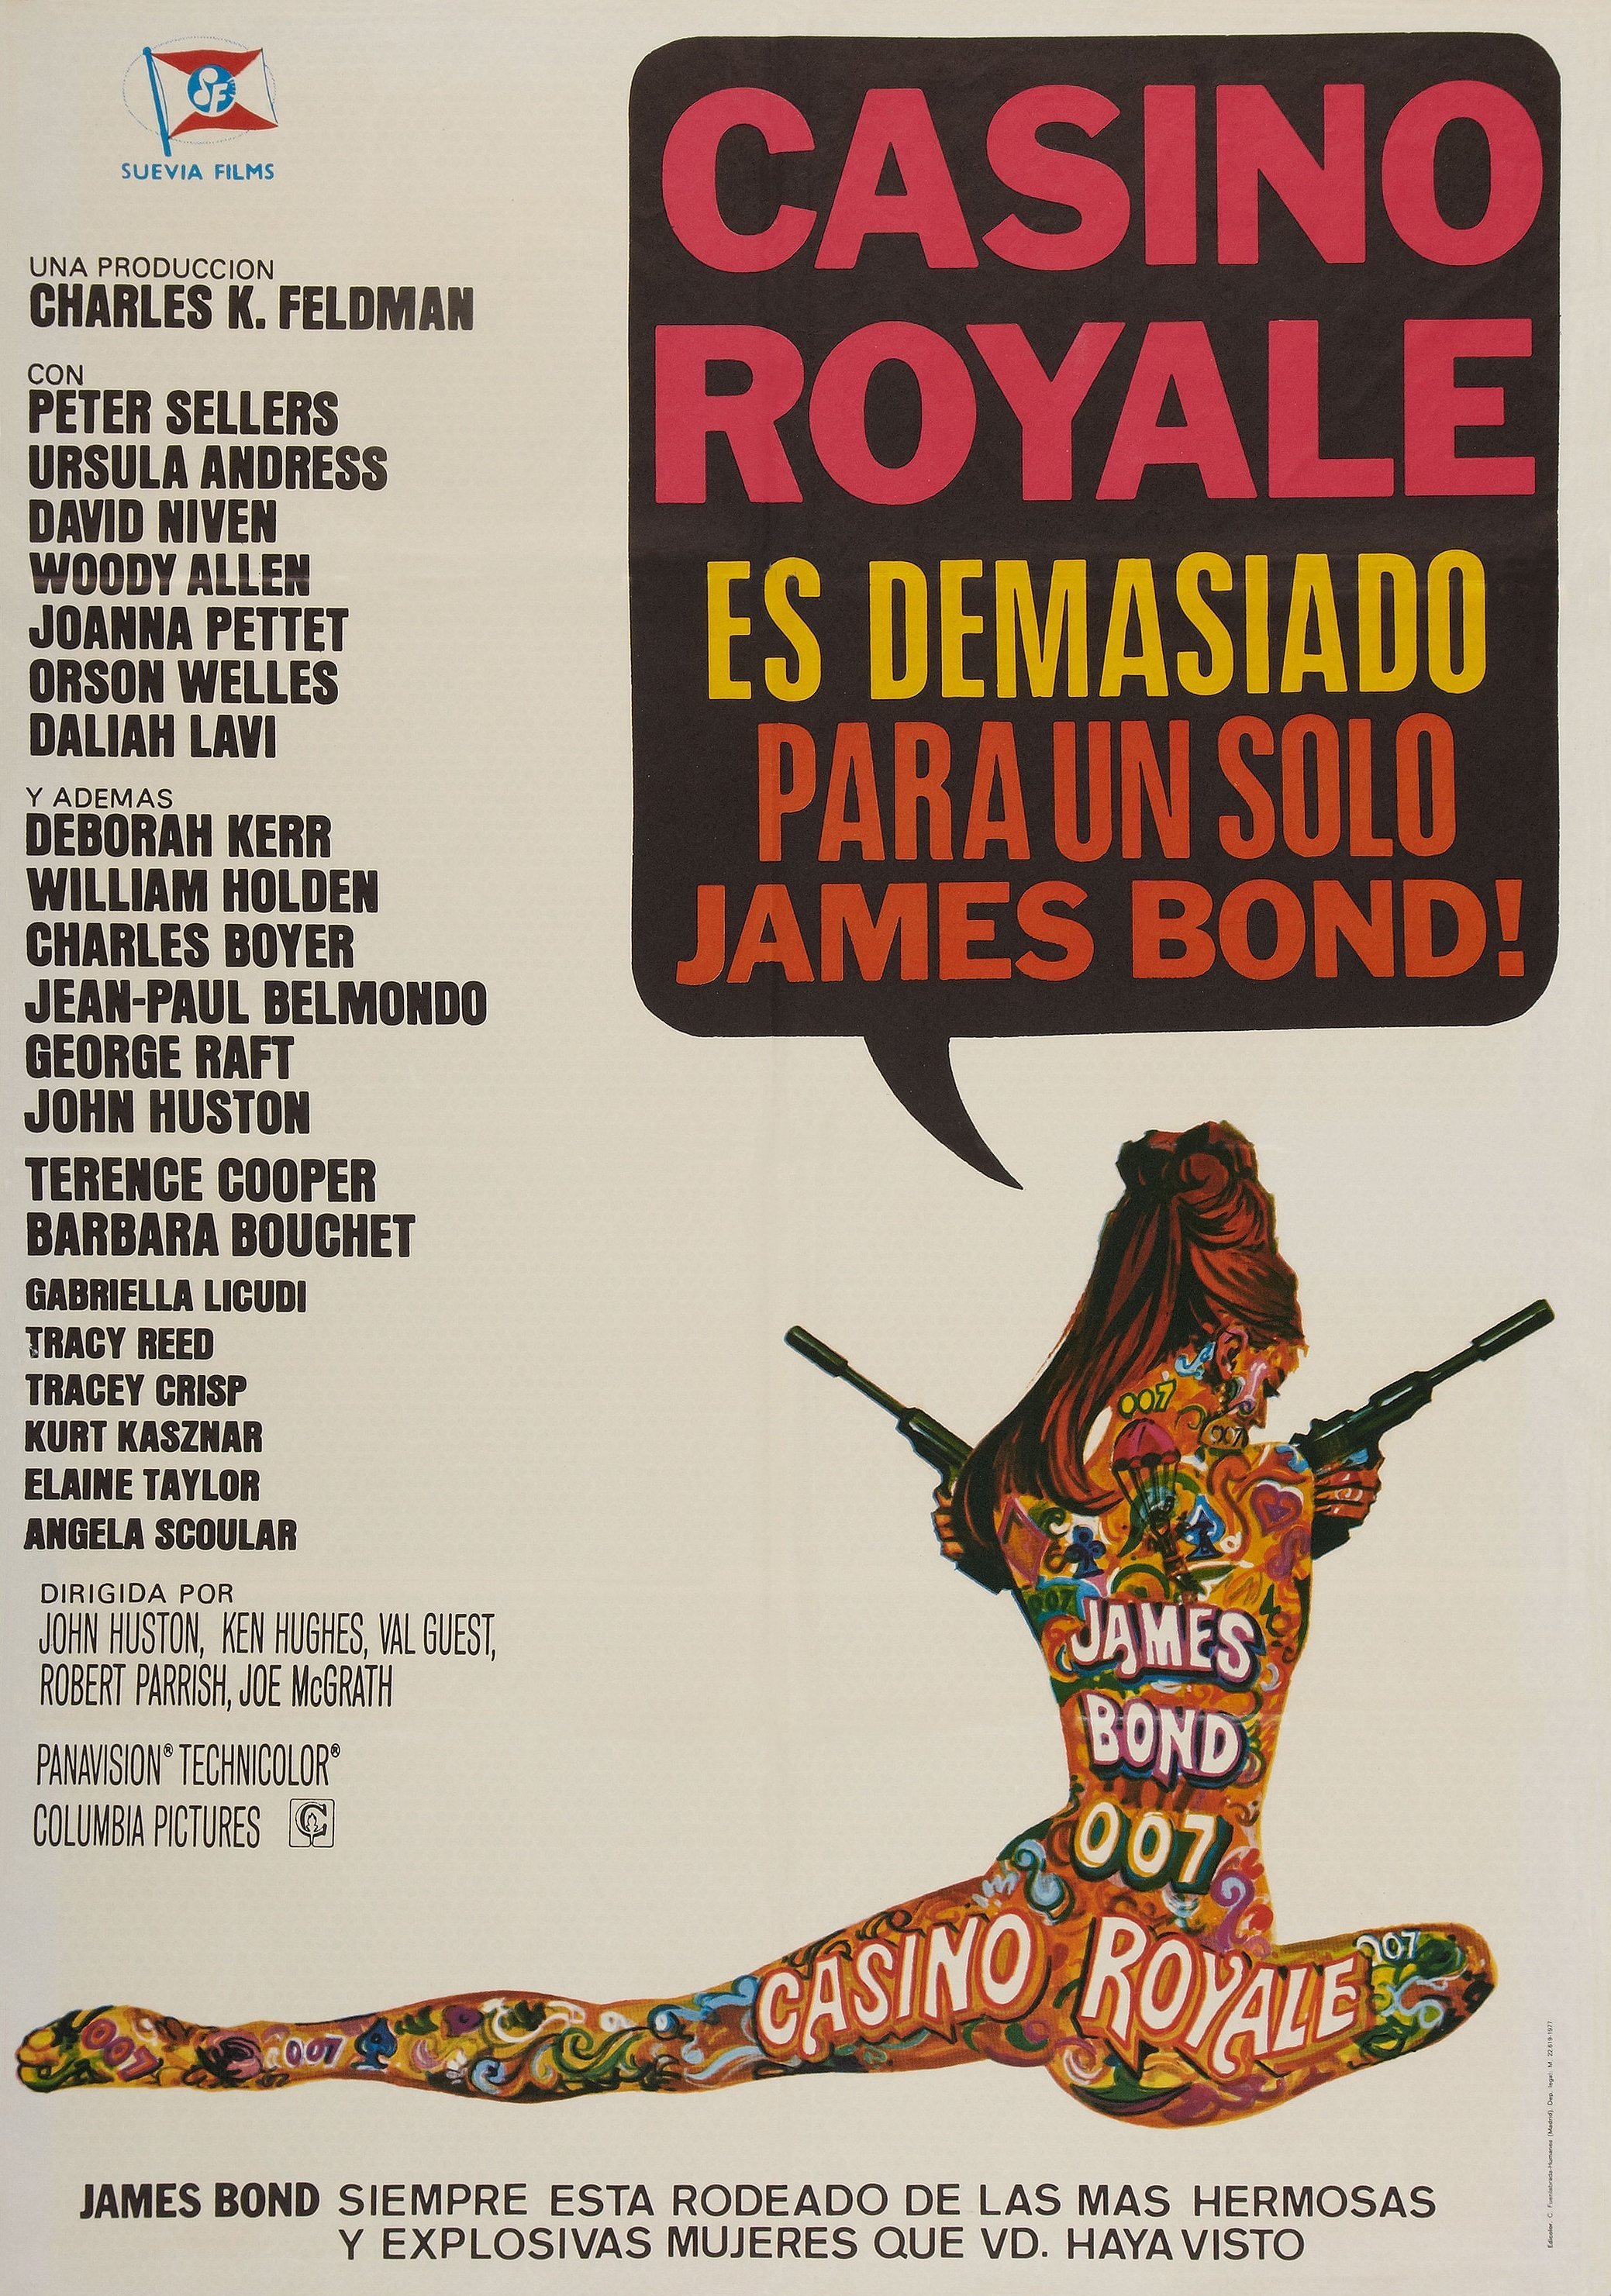 who played james bond in casino royale (1967)